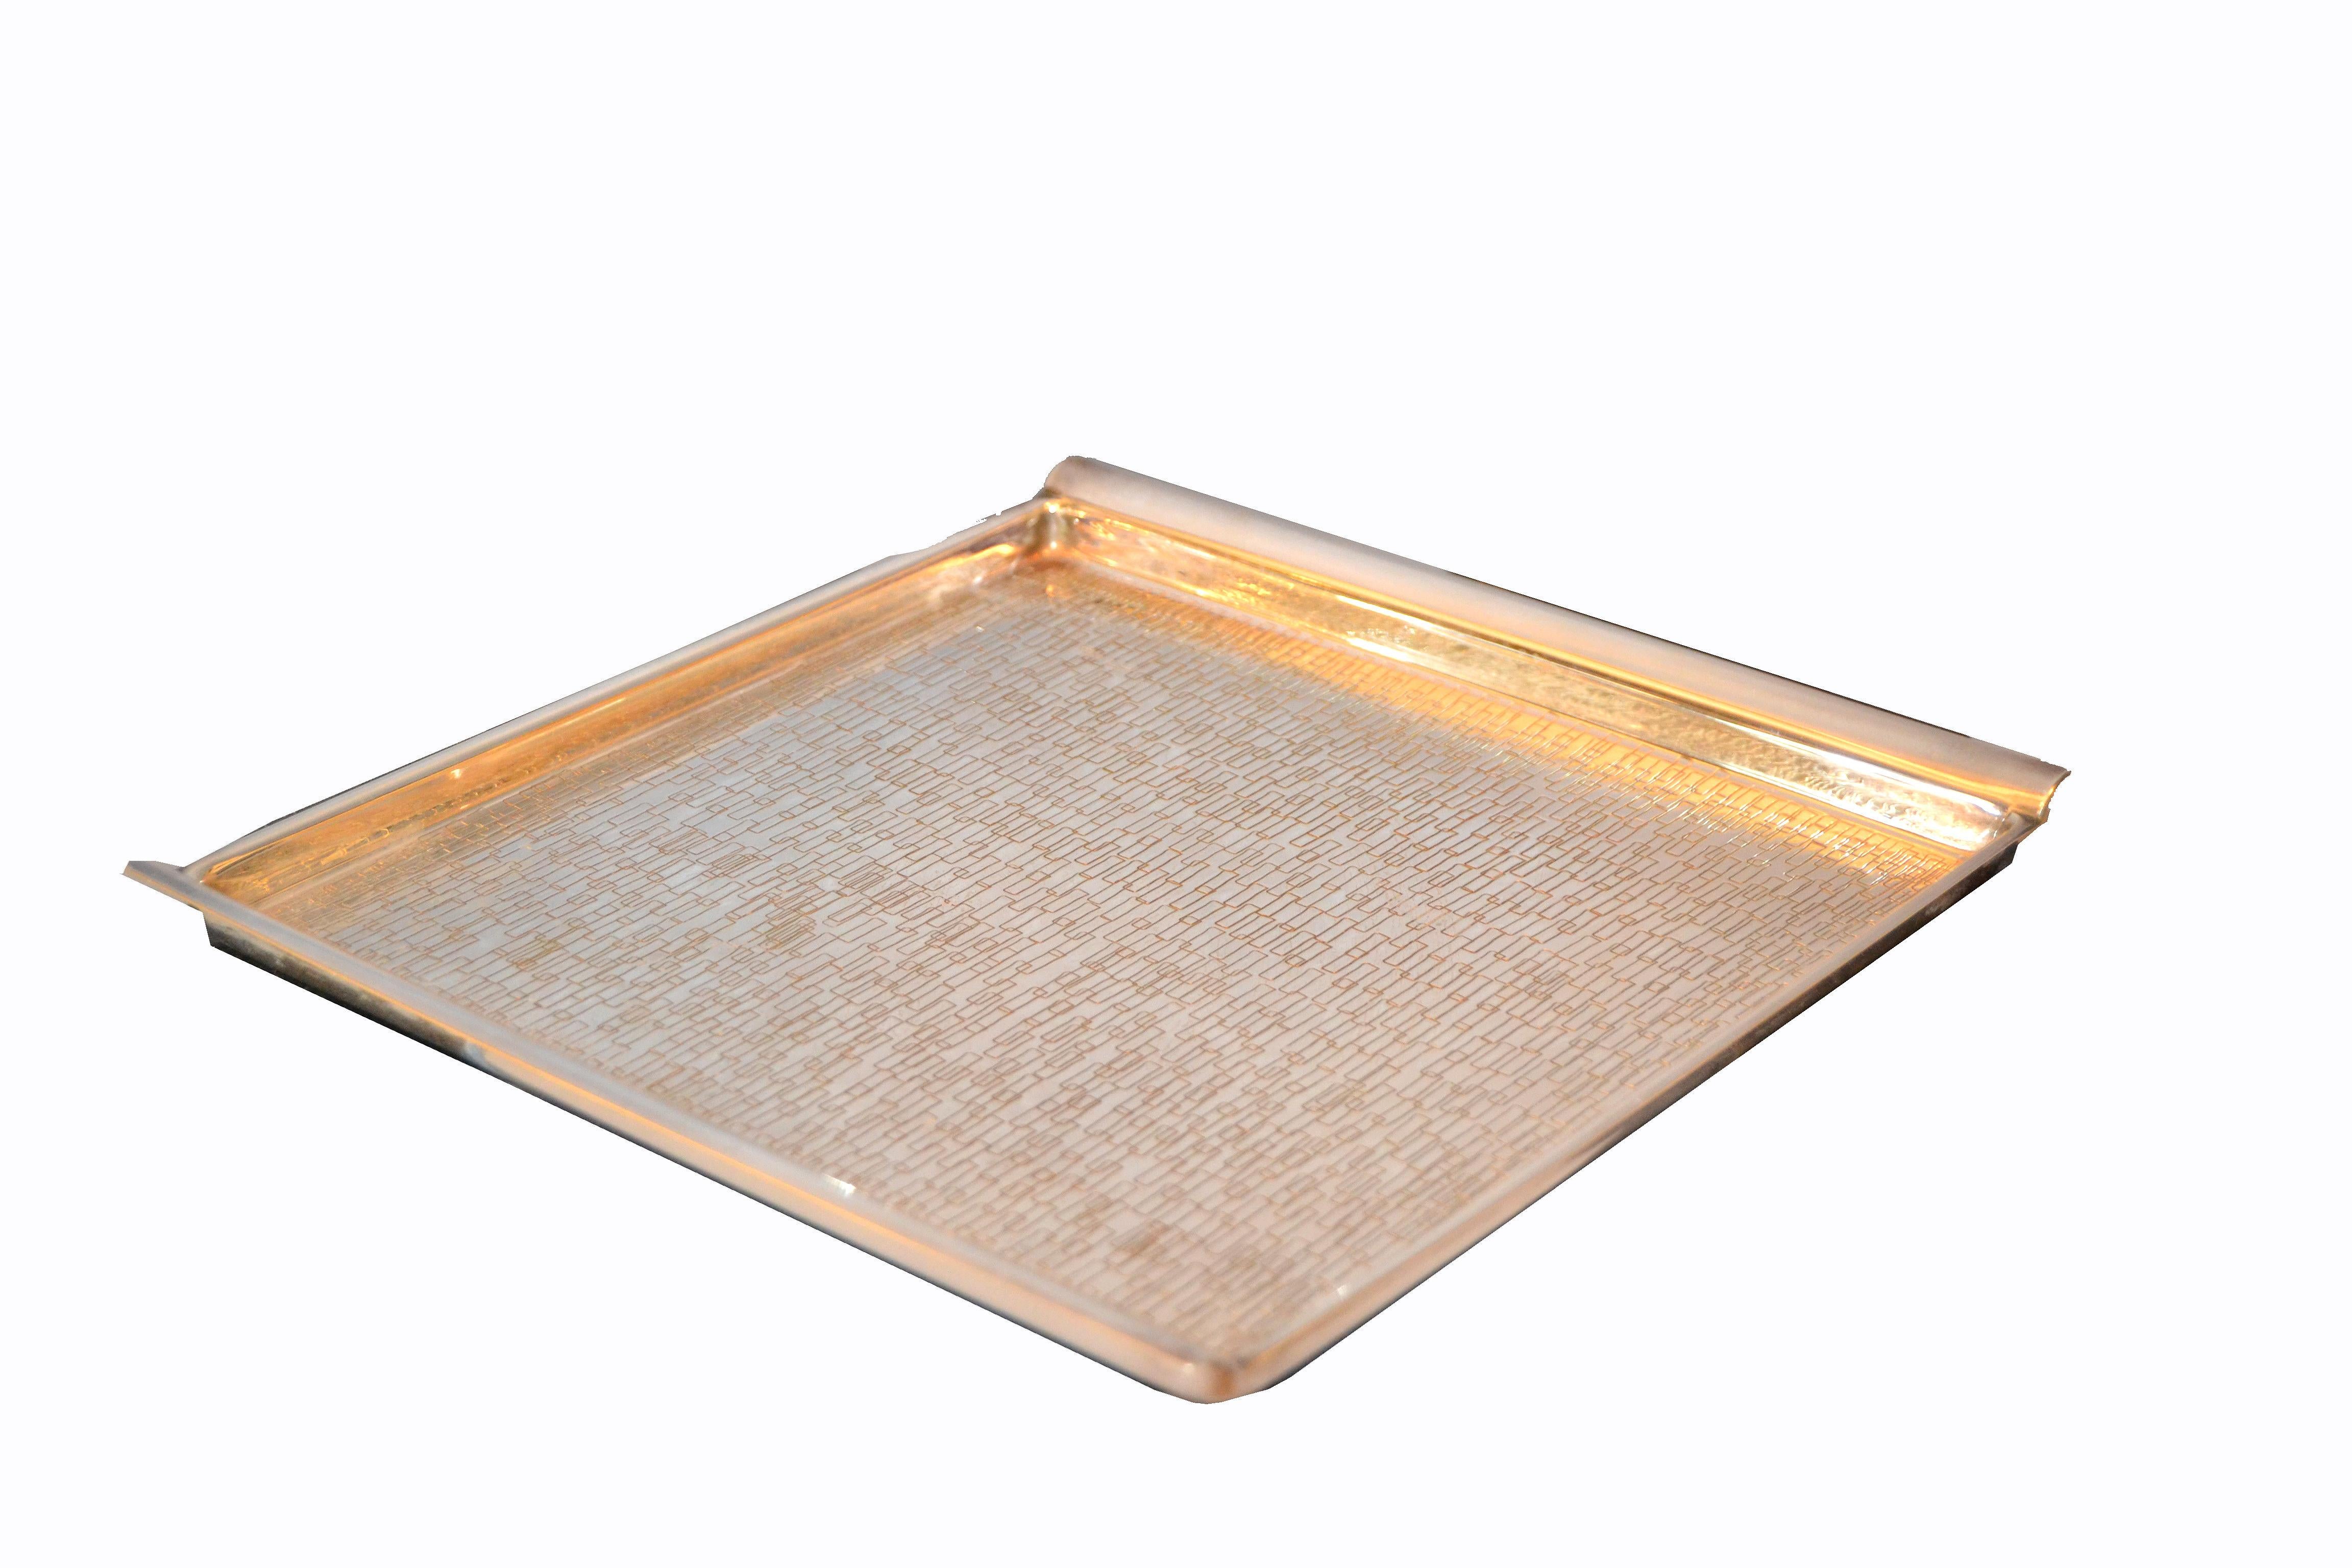 Birks Hollywood Regency silver plated textured rectangular serving tray for Zanetta.
Markings underneath.